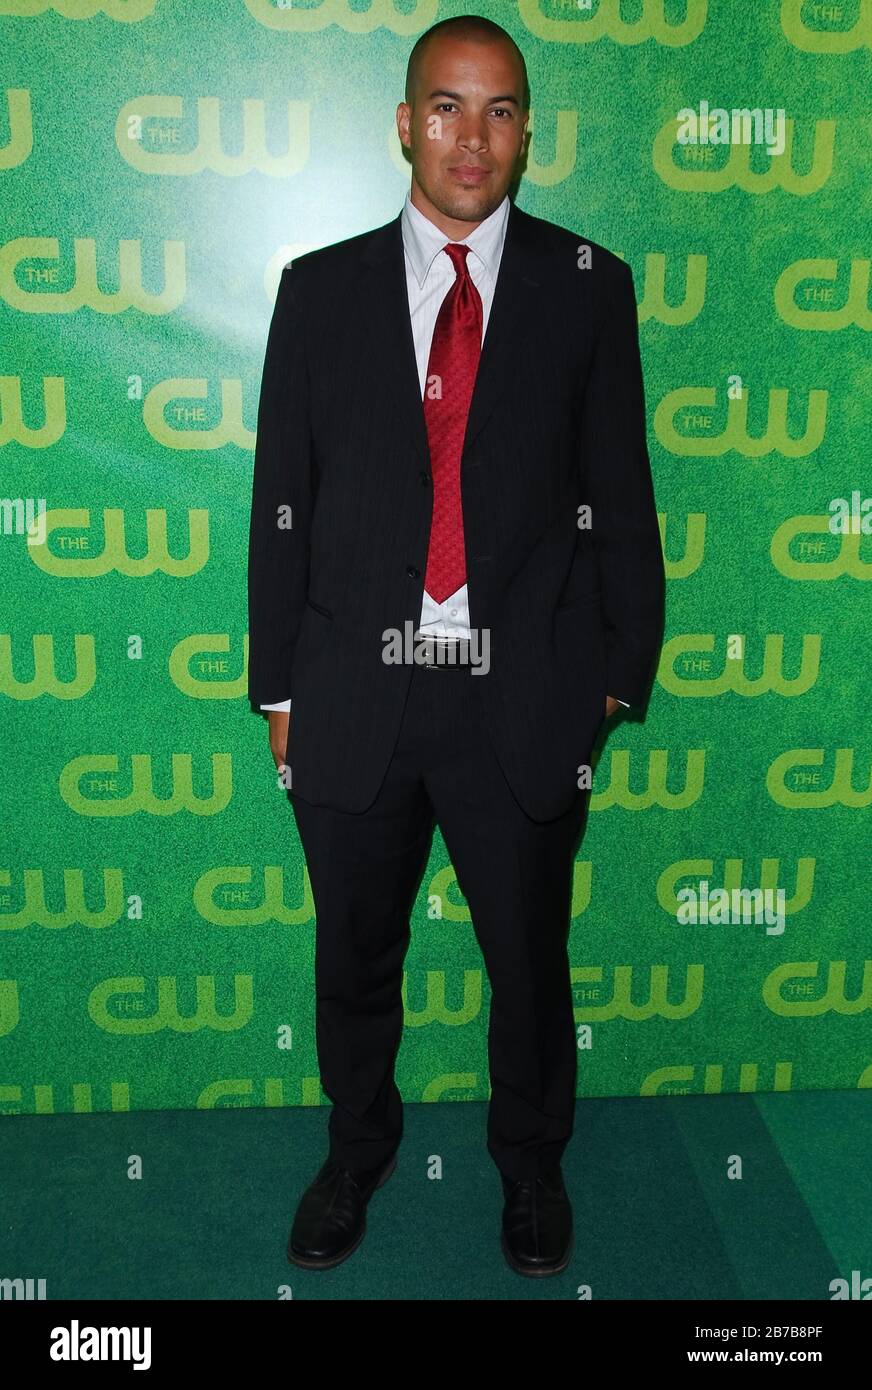 Coby Bell at The CW Television Network 2006 TCA Summer Press Tour - Day Arrivals held at the Ritz Carlton Hotel in Pasadena, CA. The event took place on Monday, July 17, 2006.  Photo by: SBM / PictureLux Stock Photo